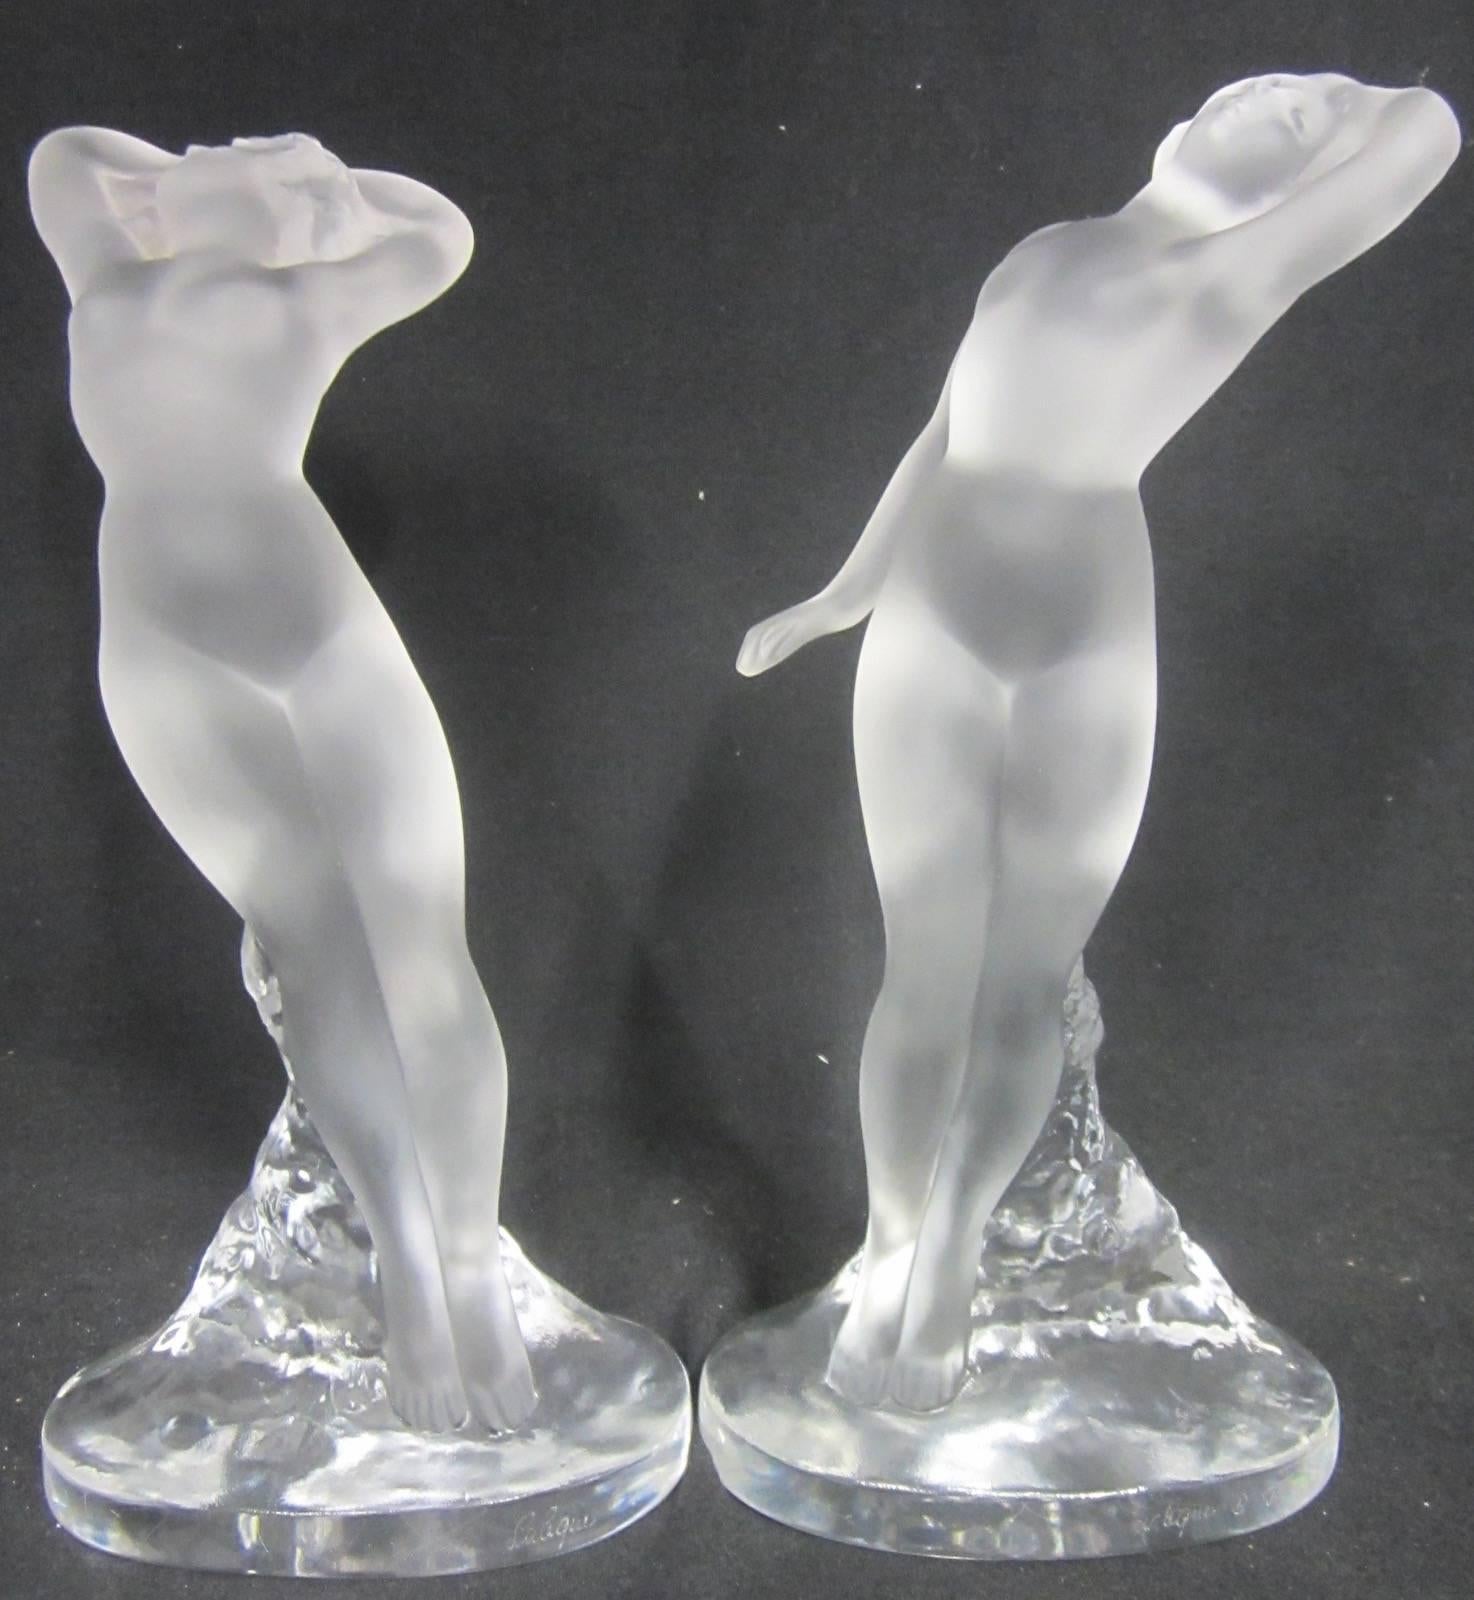 Pair of Lalique frosted glass danseuse nude dancer figurines.
One with arms up, one with arm out.
Both signed Lalique France
Measure: 24cm high.